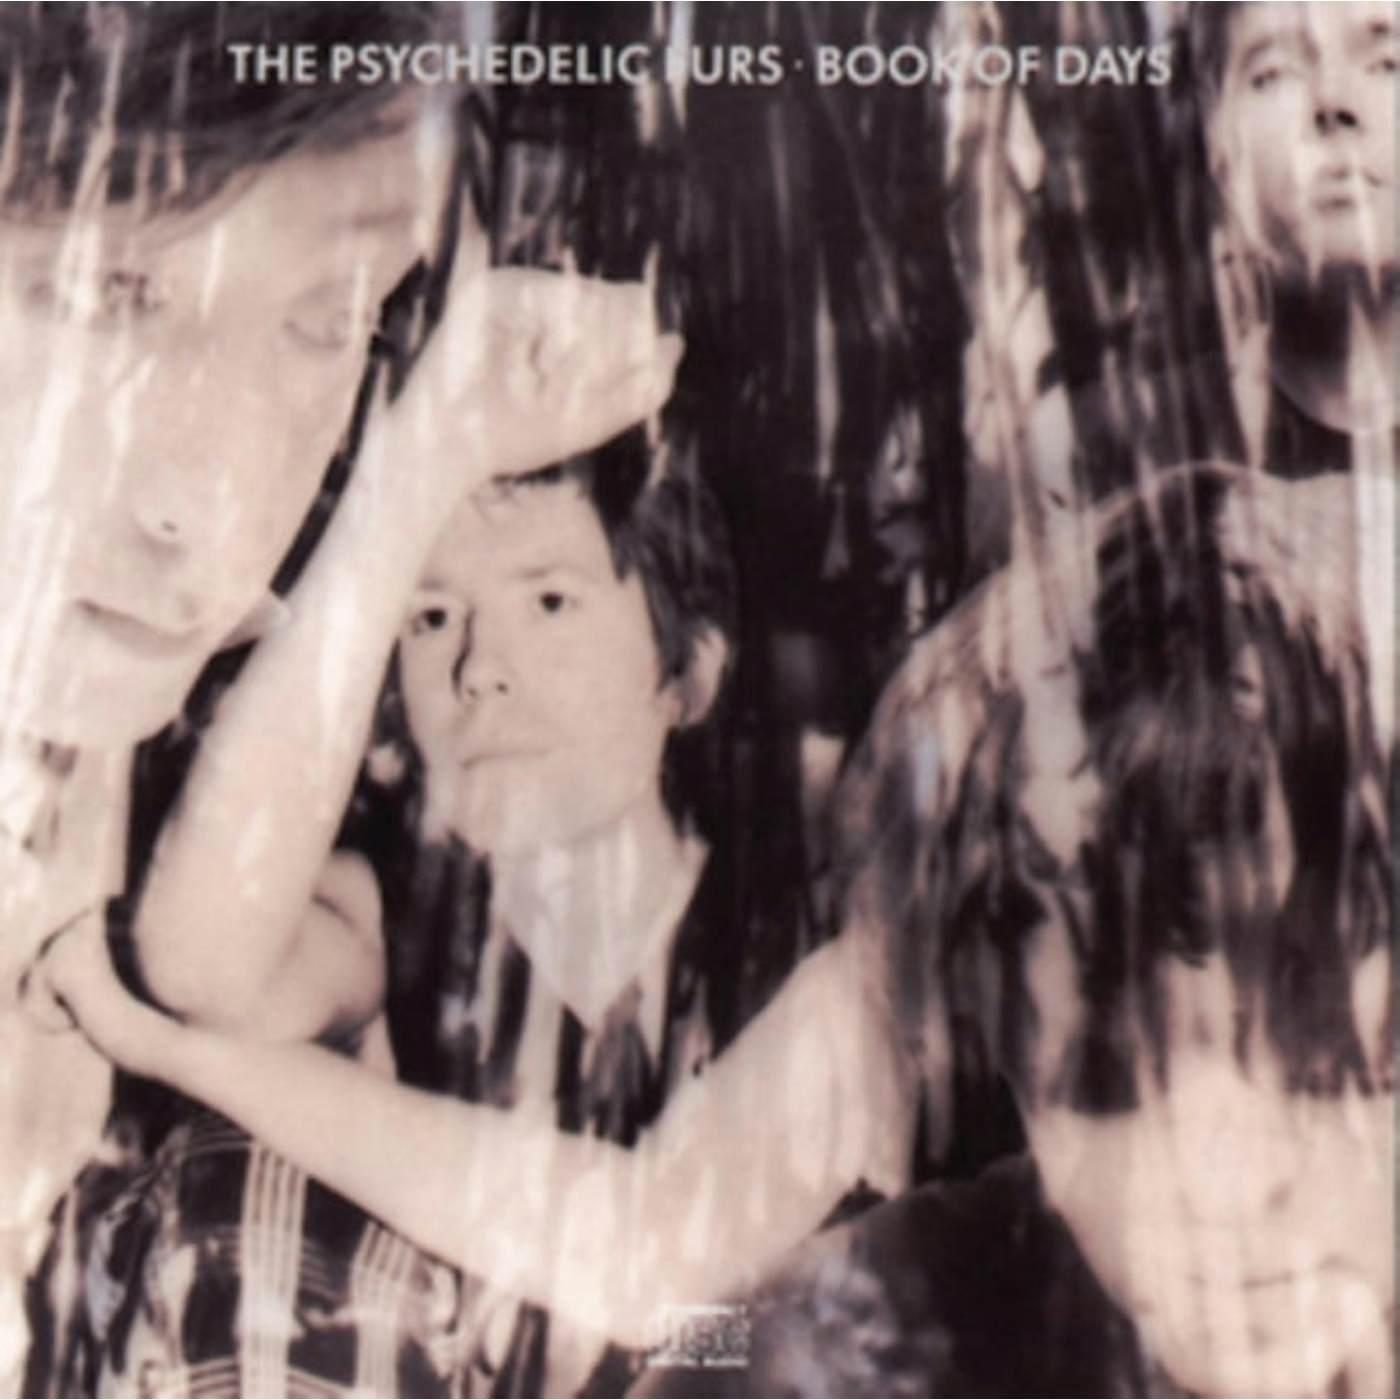 The Psychedelic Furs LP Vinyl Record - Book Of Days